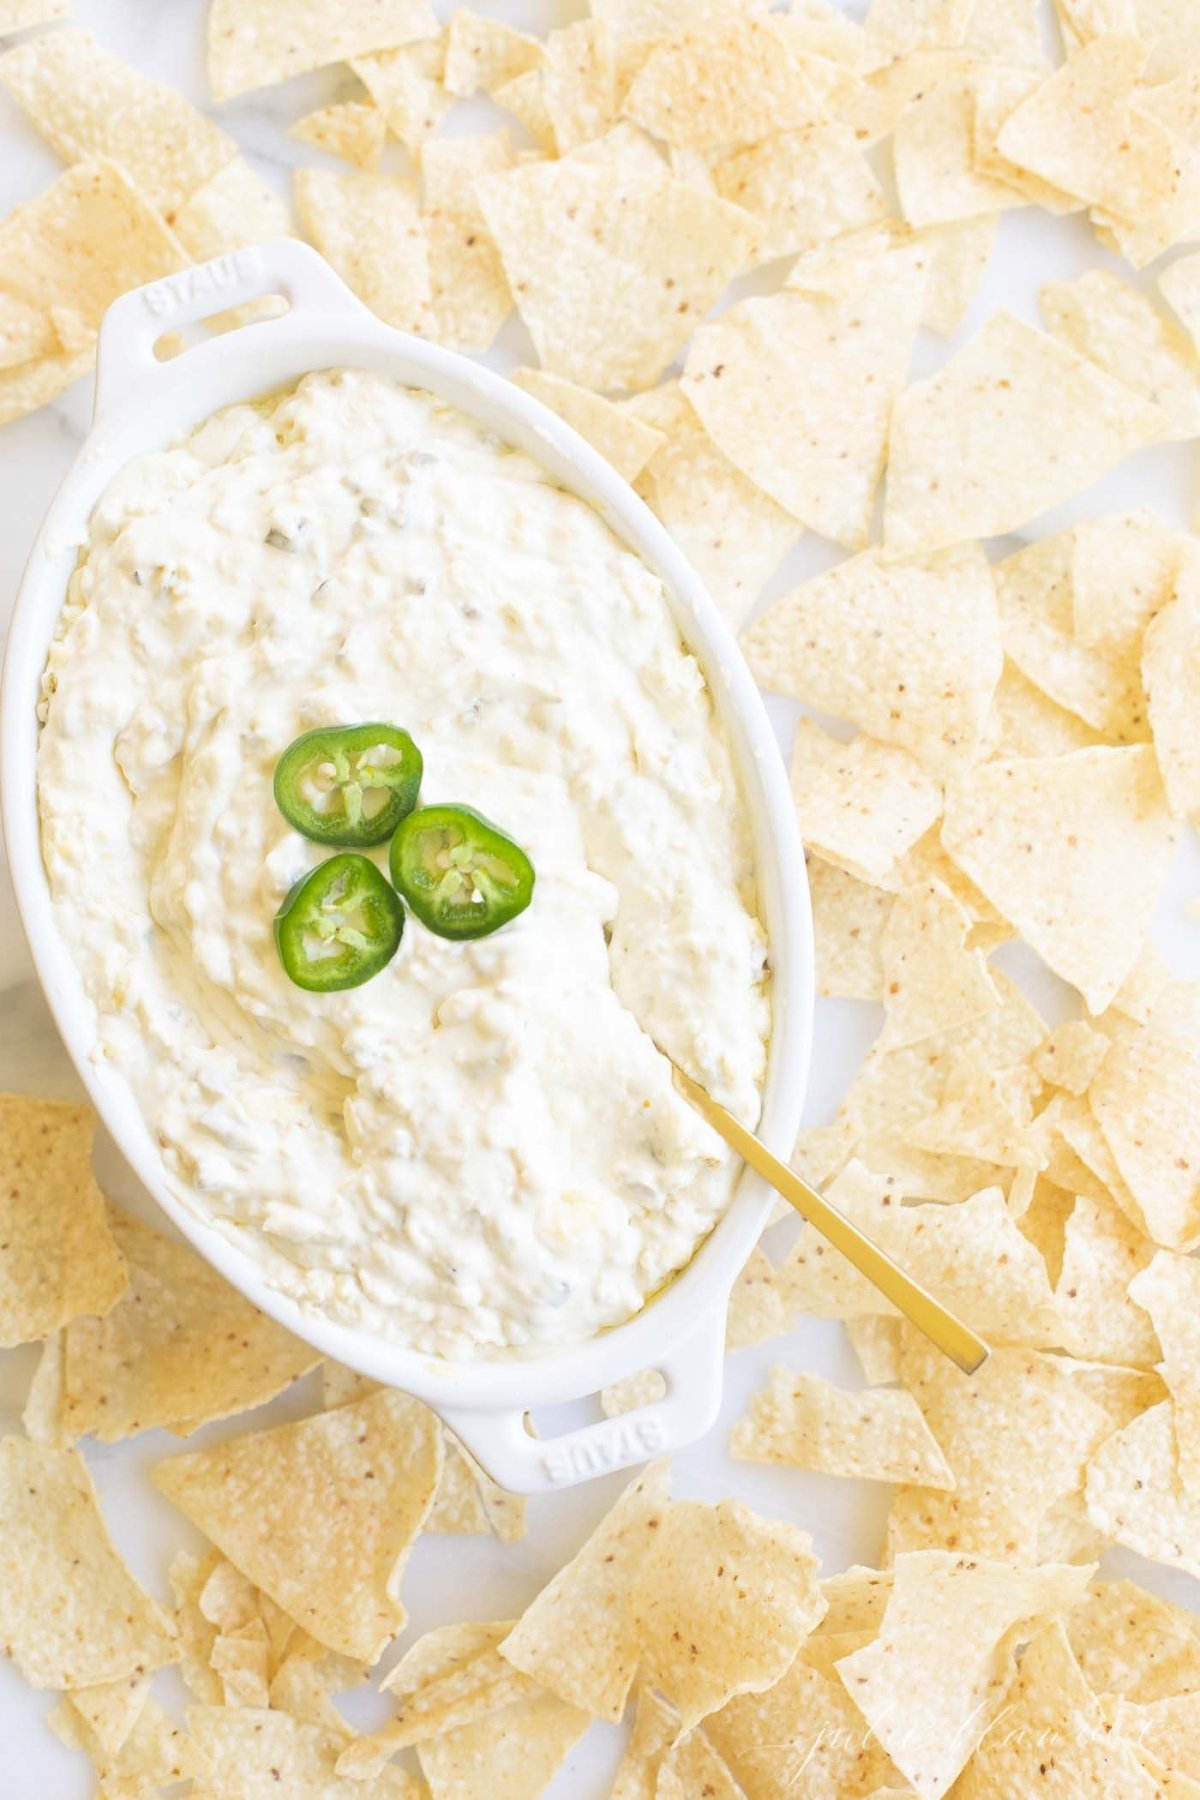 An oval serving dish full of jalapeno dip, surrounded by tortilla chips.